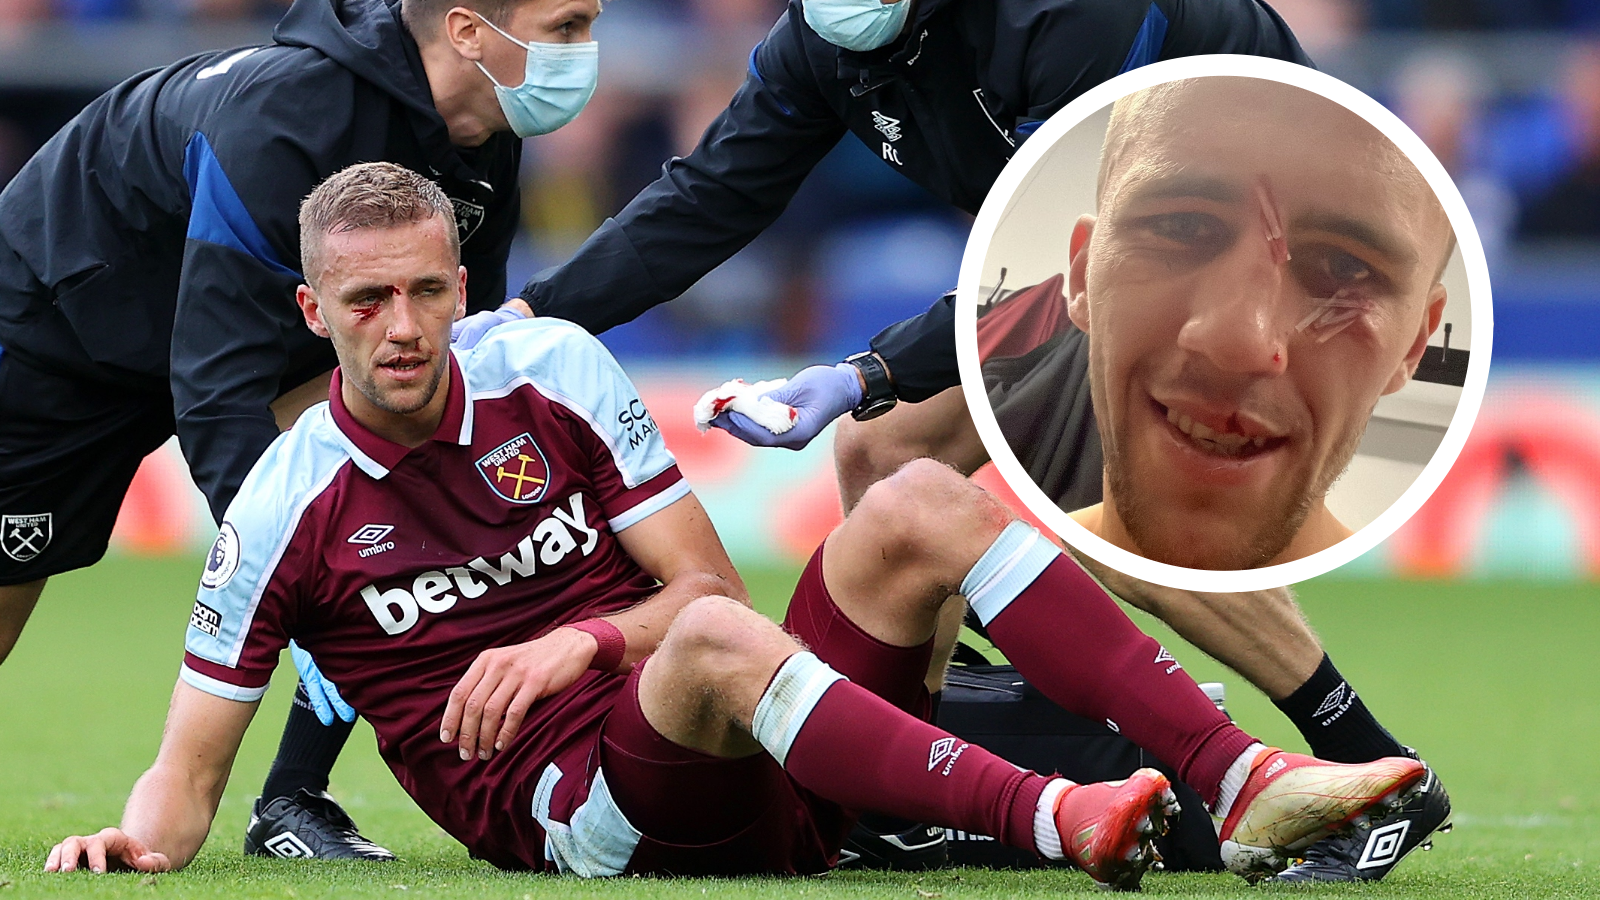 ‘I am still alive!’ – Soucek reveals stitches after suffering boot to the face during West Ham clash with Everton